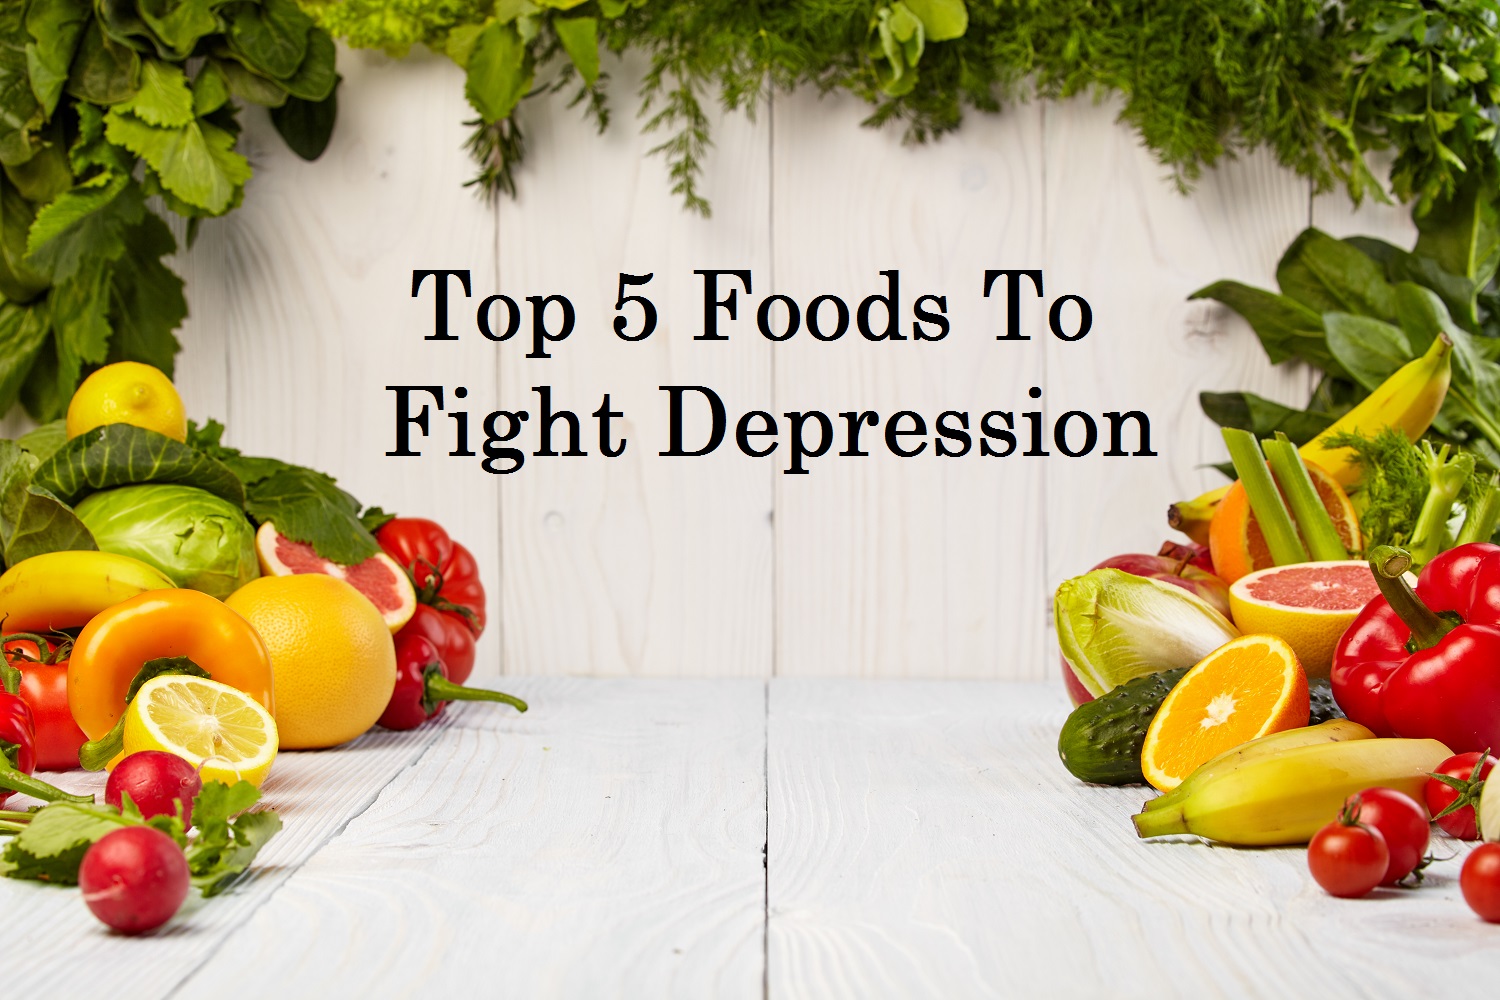 Top 5 foods to fight depression - Calorie Care